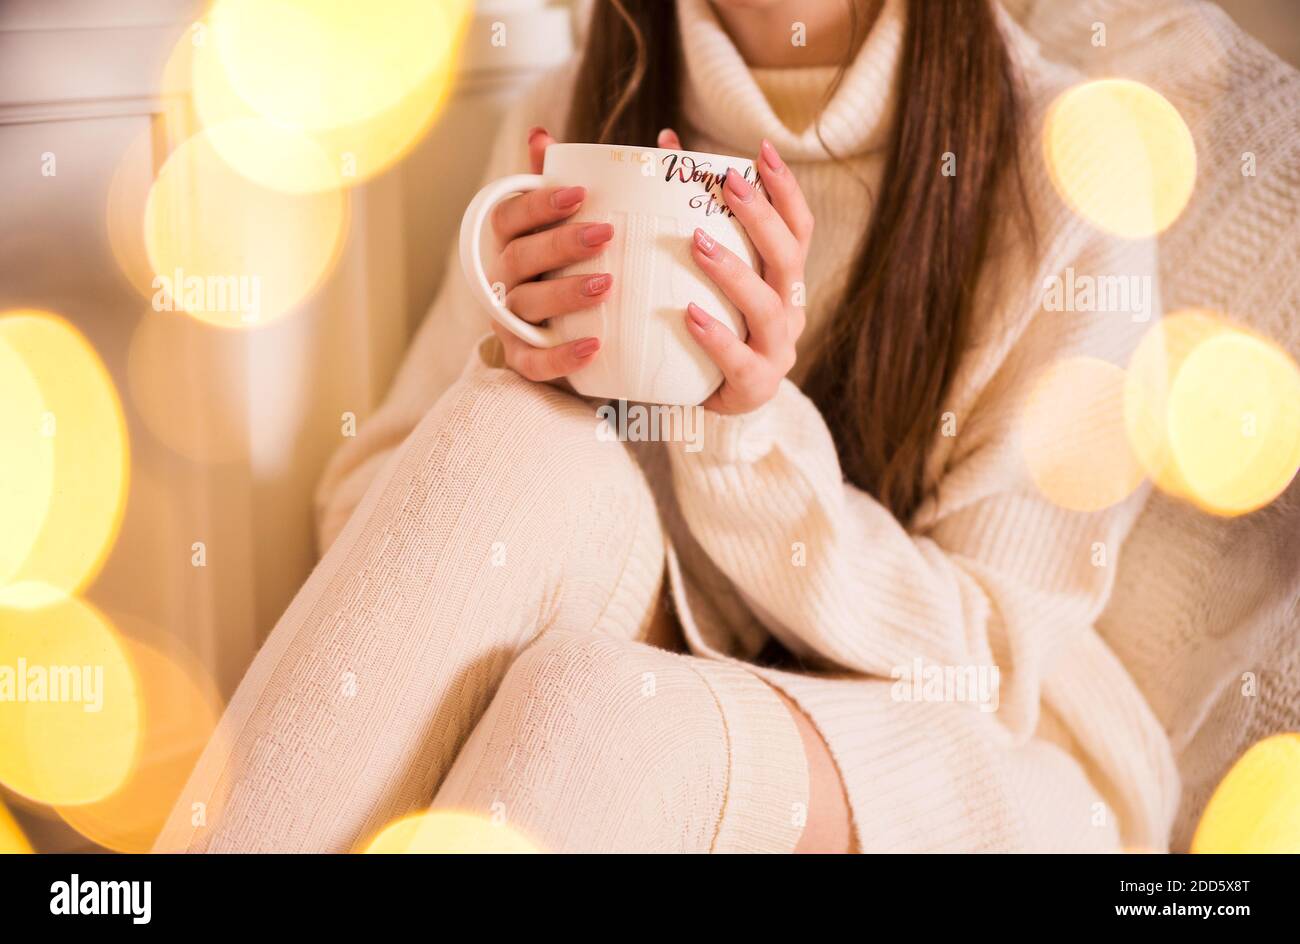 A girl in a white sweater and leggings holds a large white cup in her hands Stock Photo